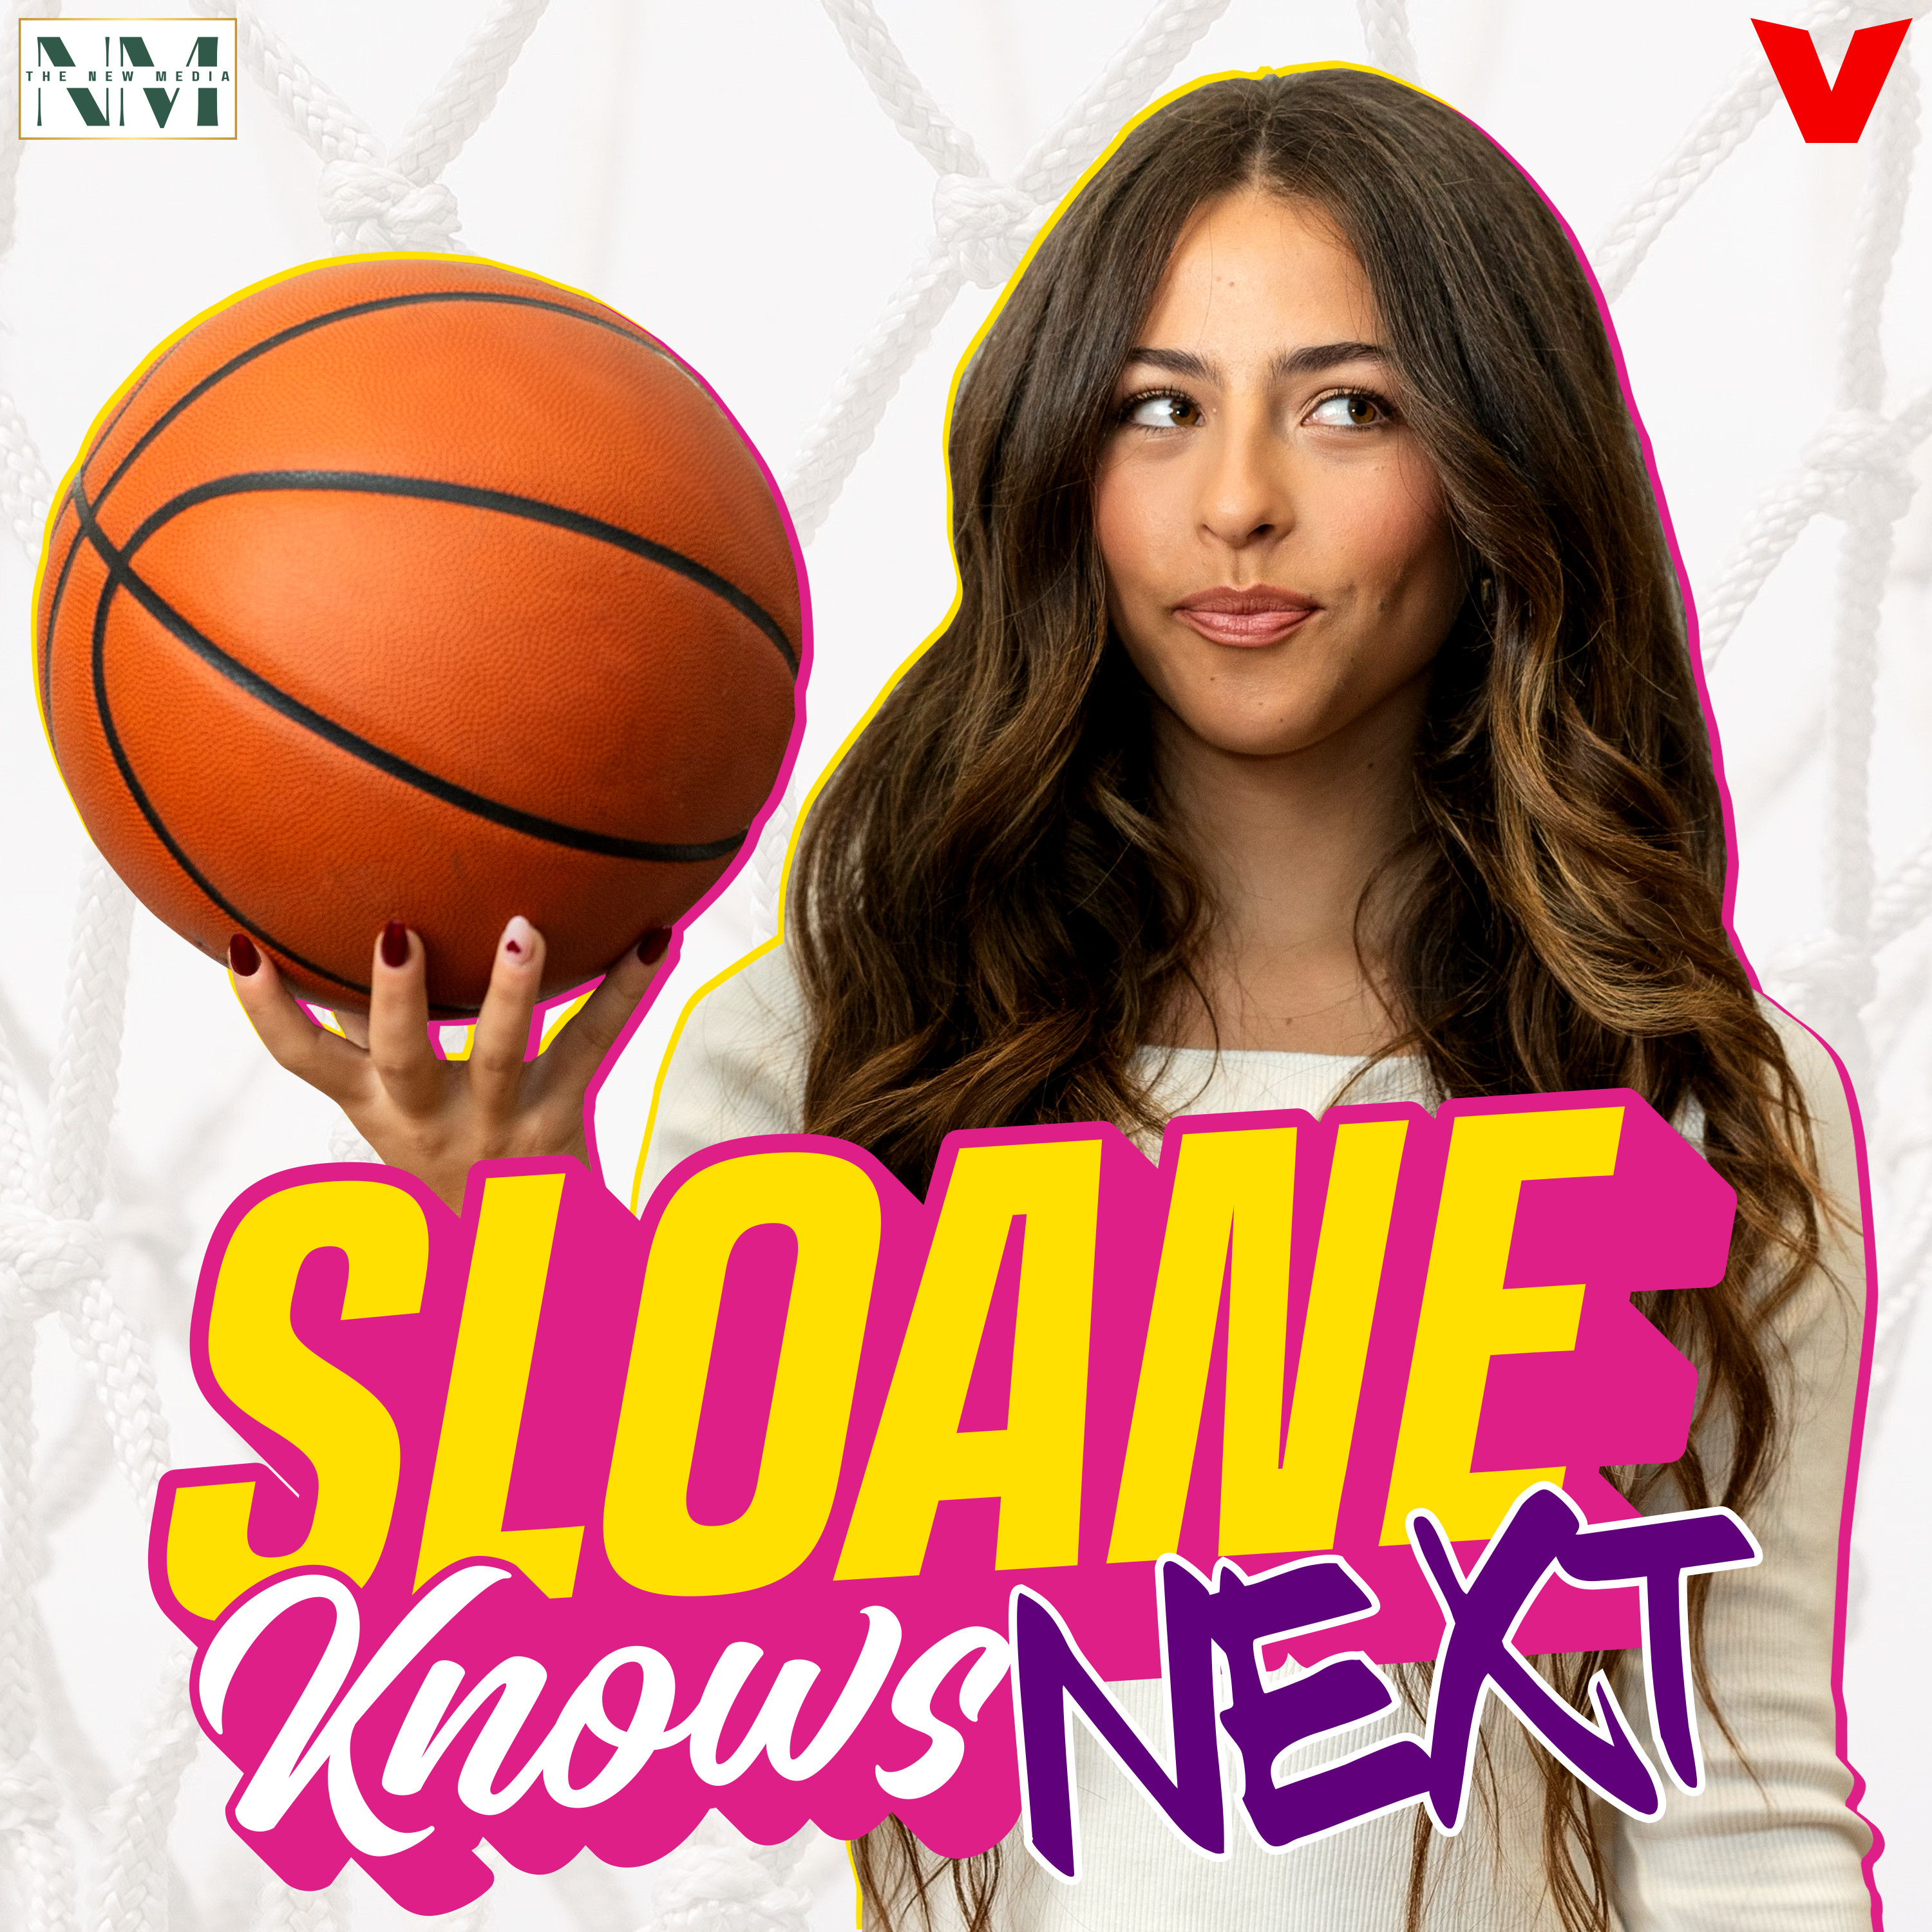 Sloane Knows NEXT - Mercy Miller on neighbor Chris Paul, playing Chet Holmgren, NBA style icons